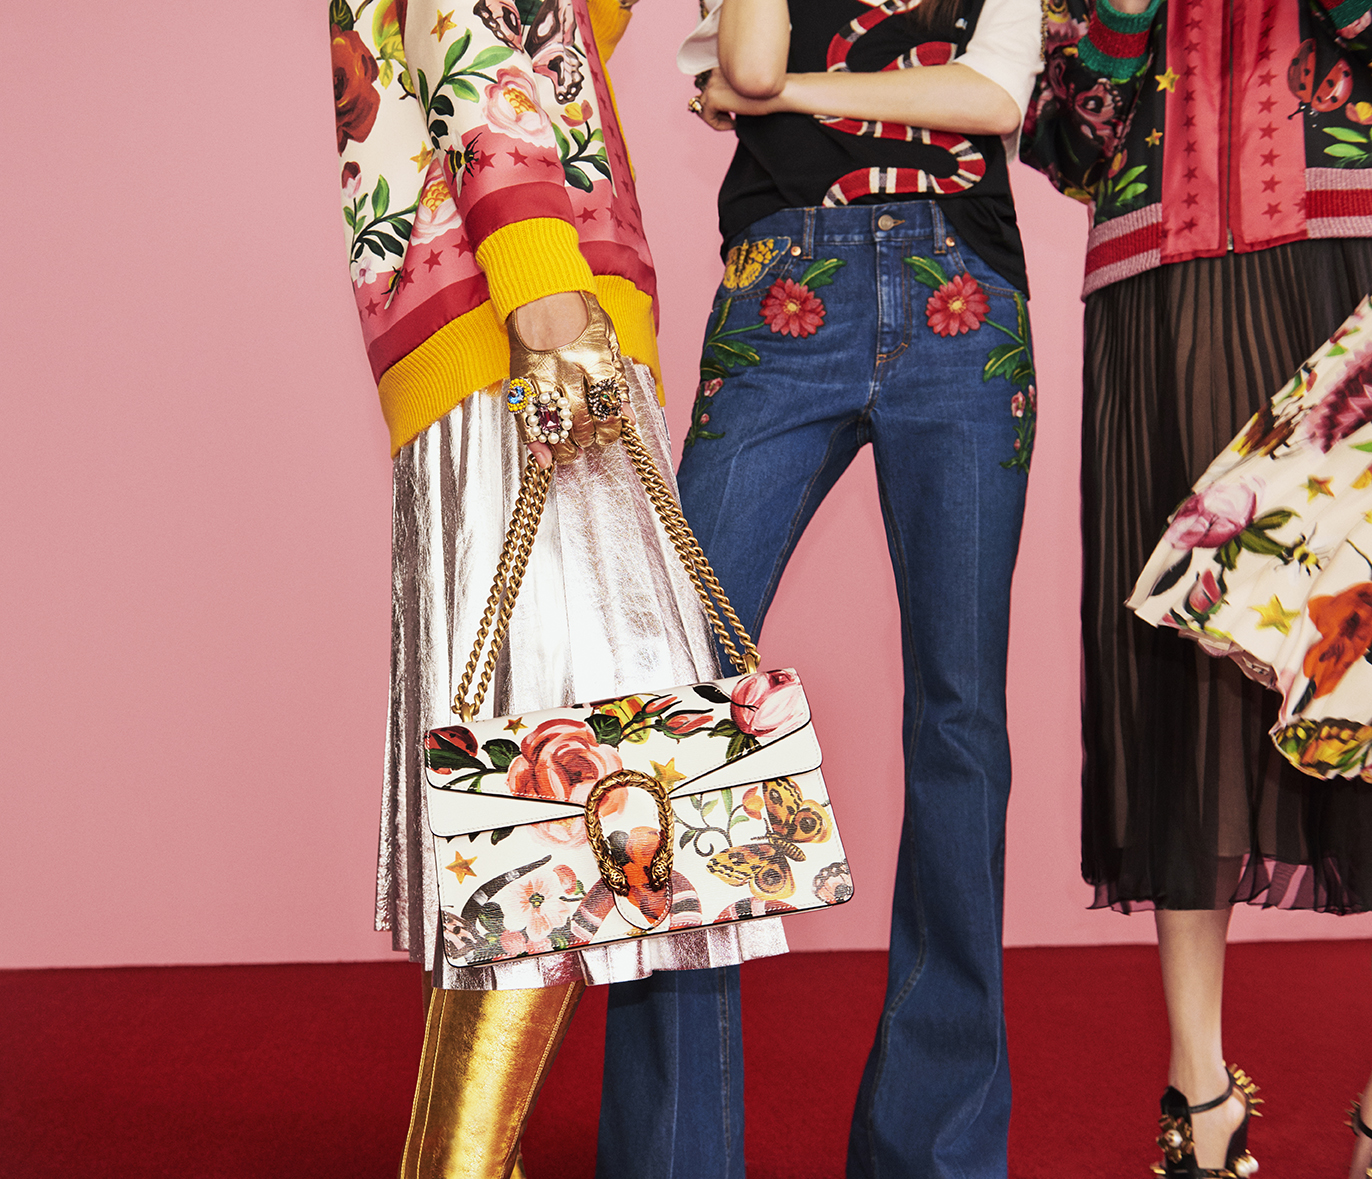 Gucci to Launch an Online Only 'Gucci Garden' Collection - Daily Front Row